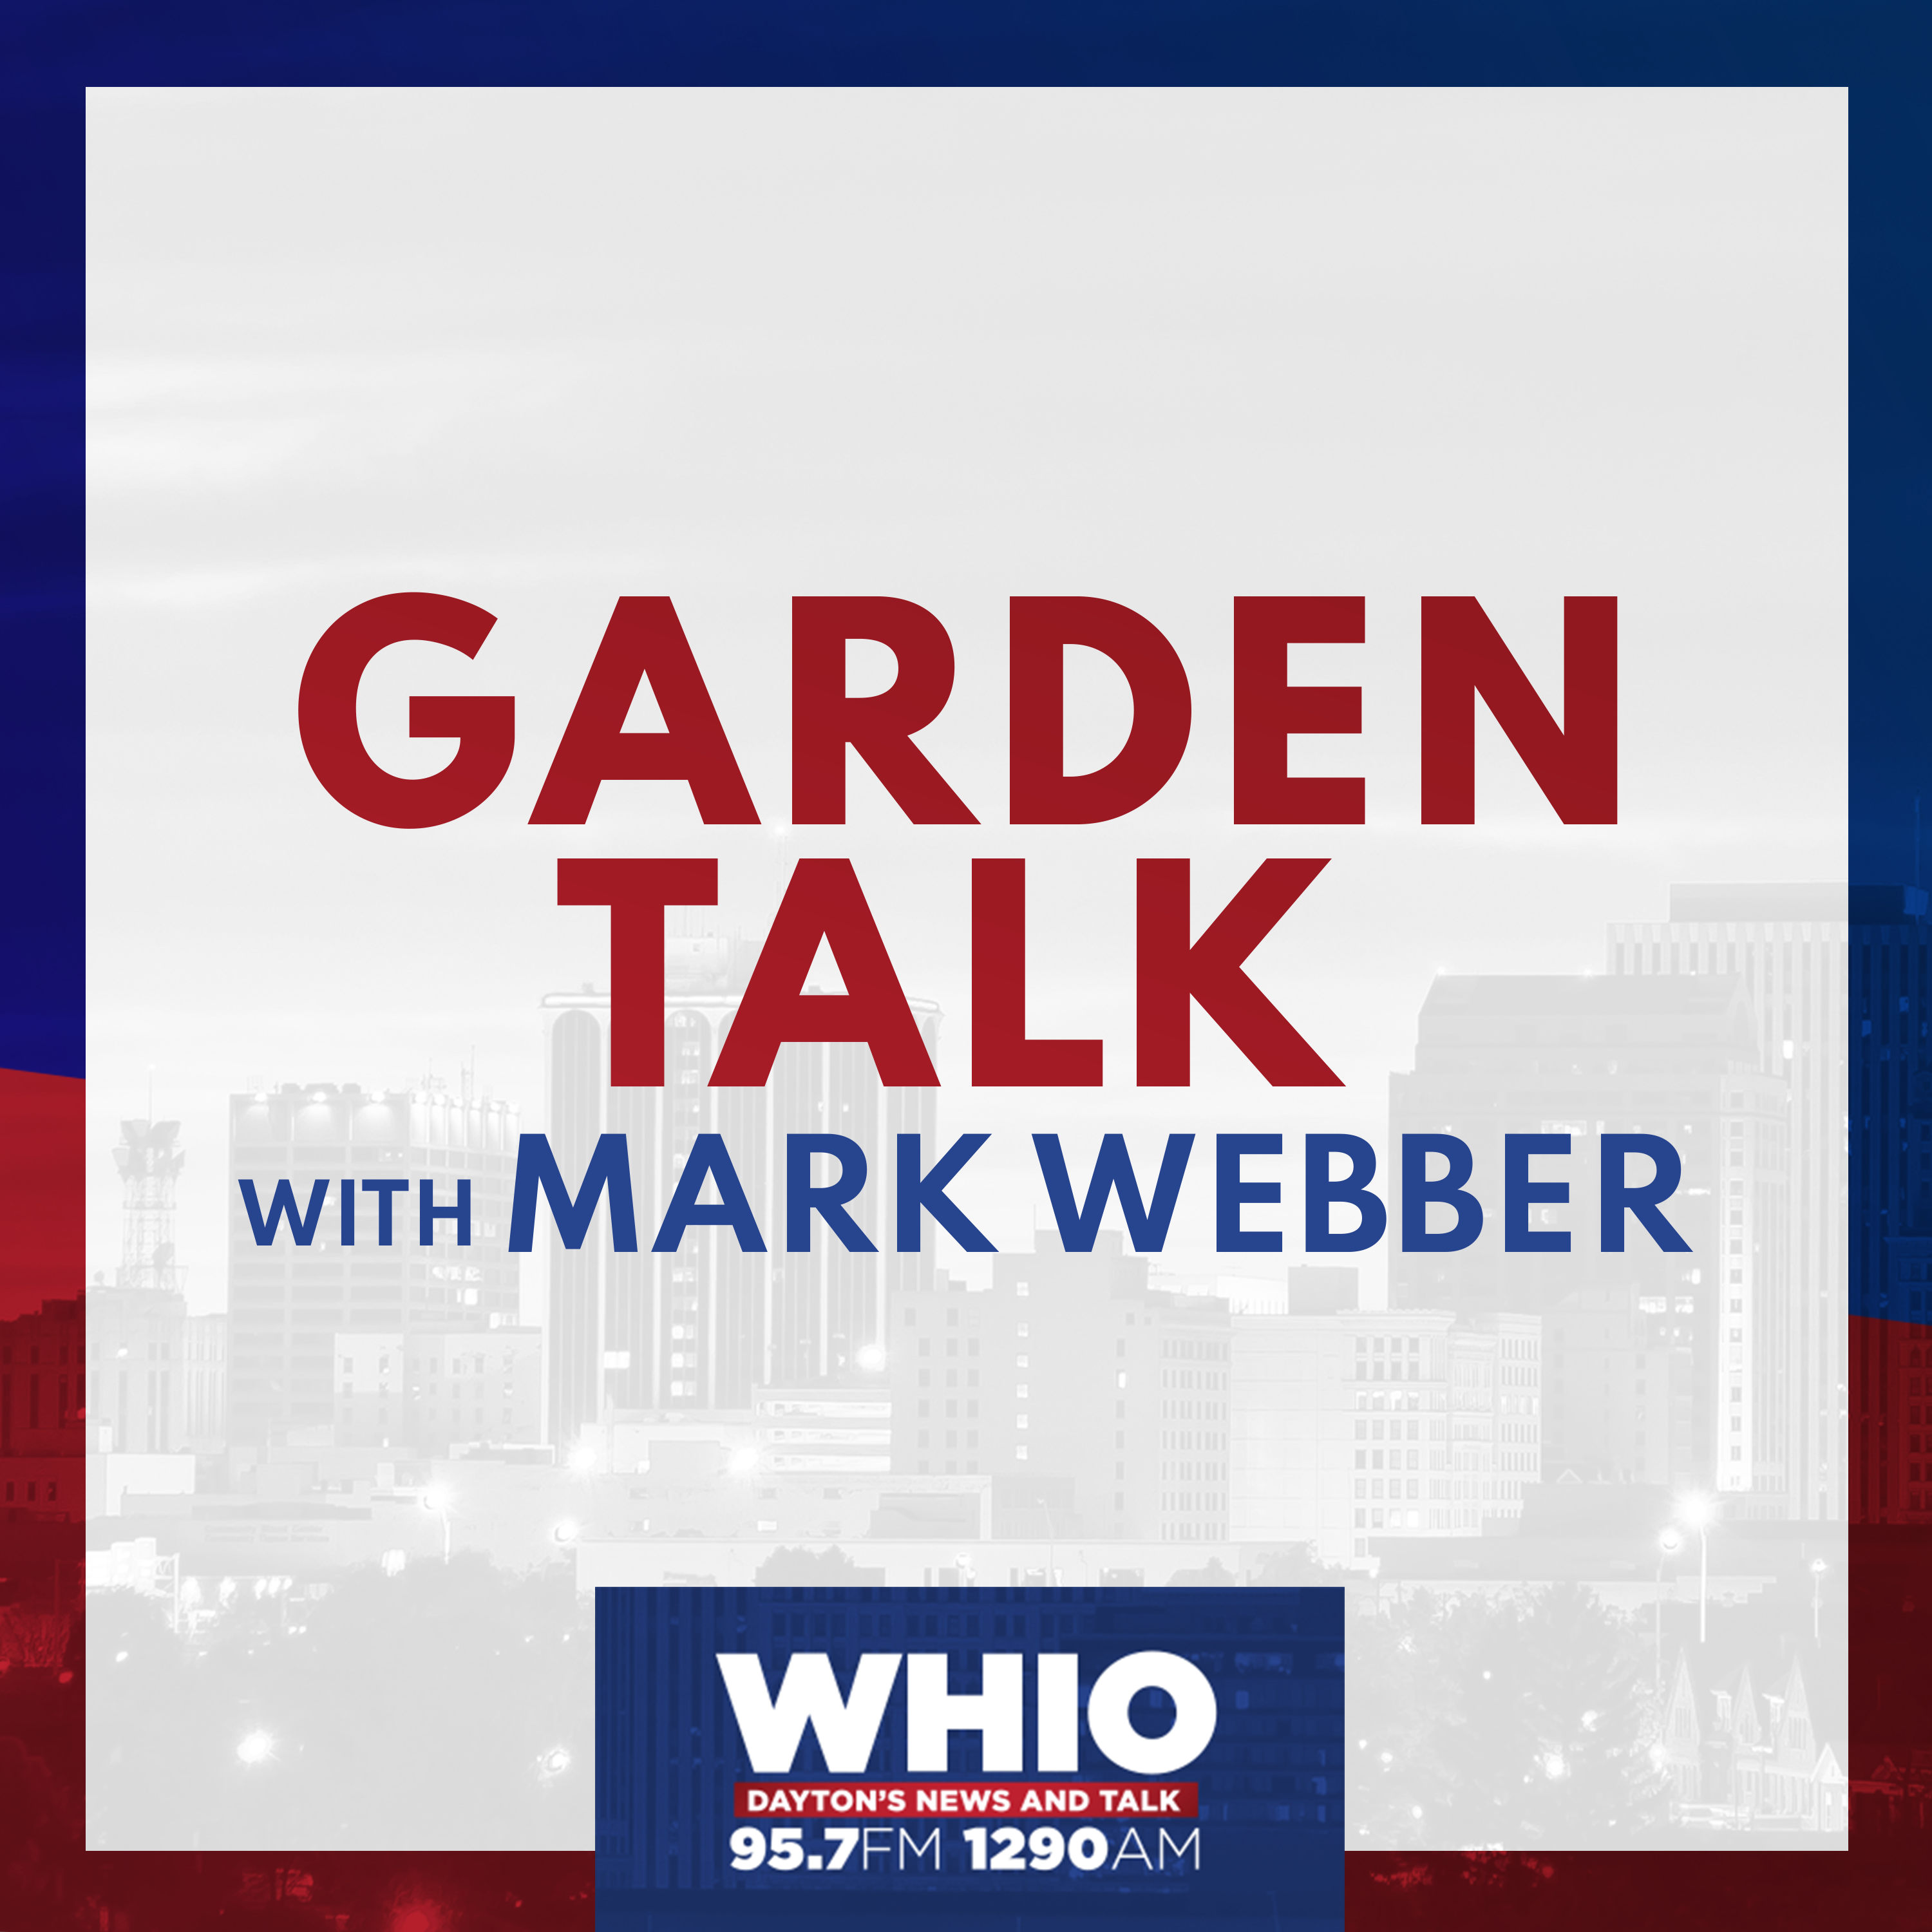 Garden Talk with Mark Webber: Hour 2 from Saturday, July 25th, 2015